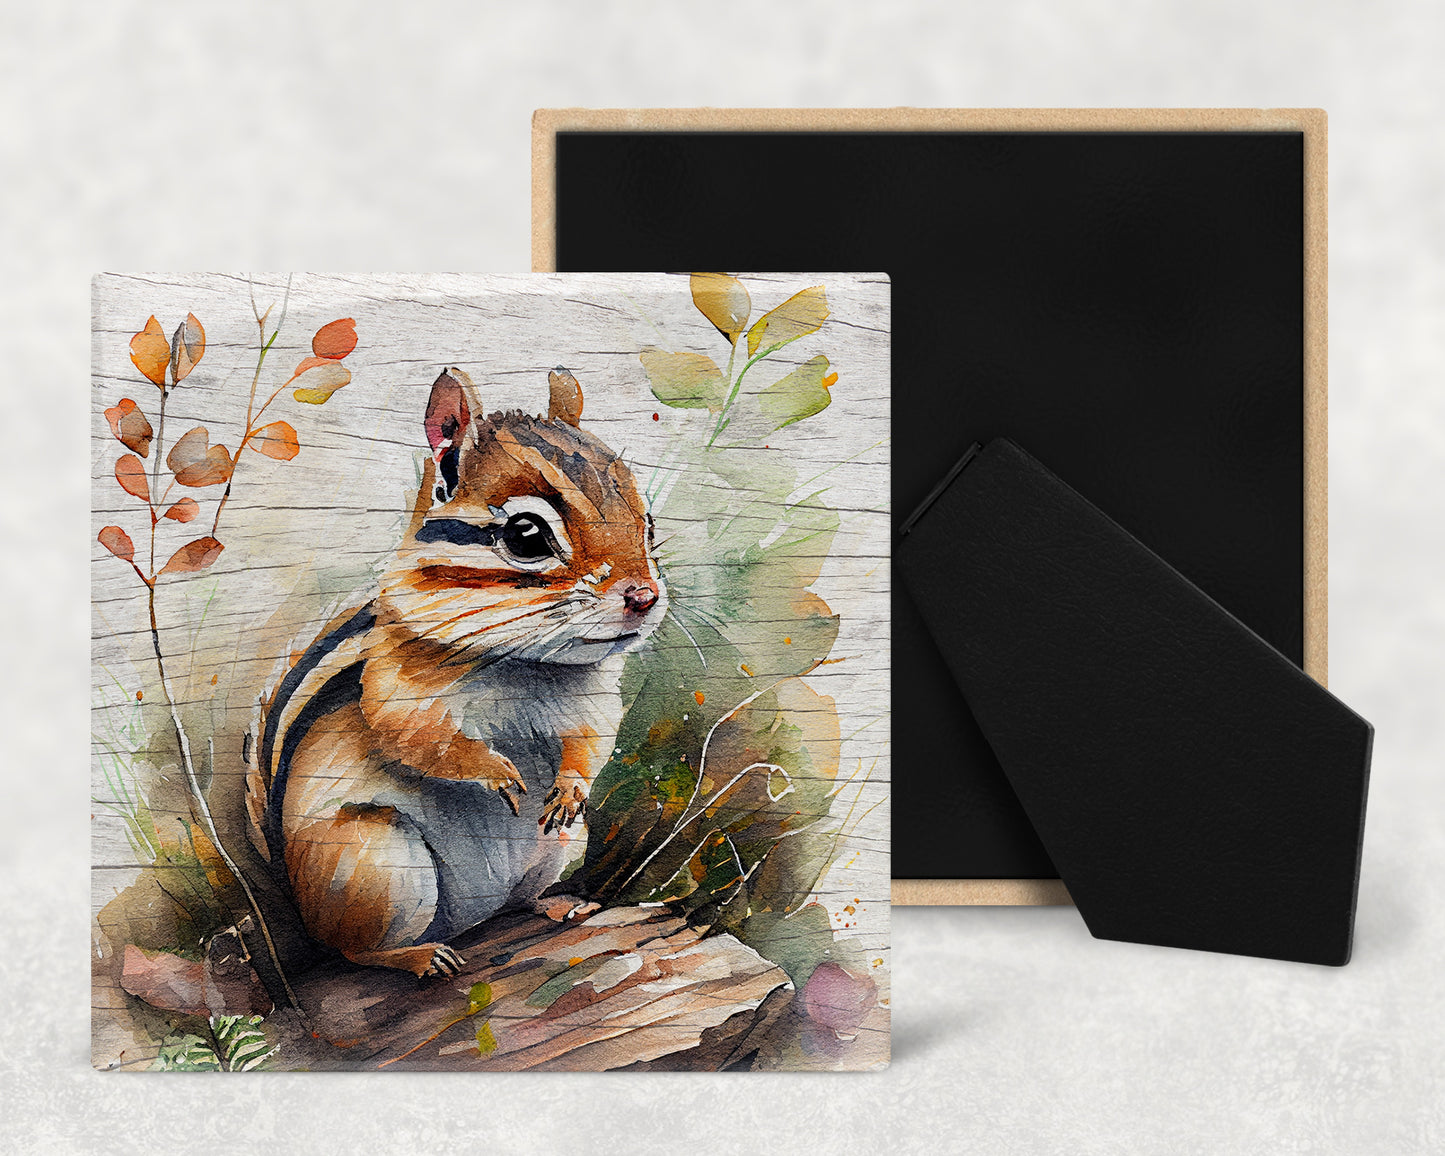 Watercolor Ground Squirrel on Wood Texture Art Decorative Ceramic Tile with Optional Easel Back - Available in 3 Sizes